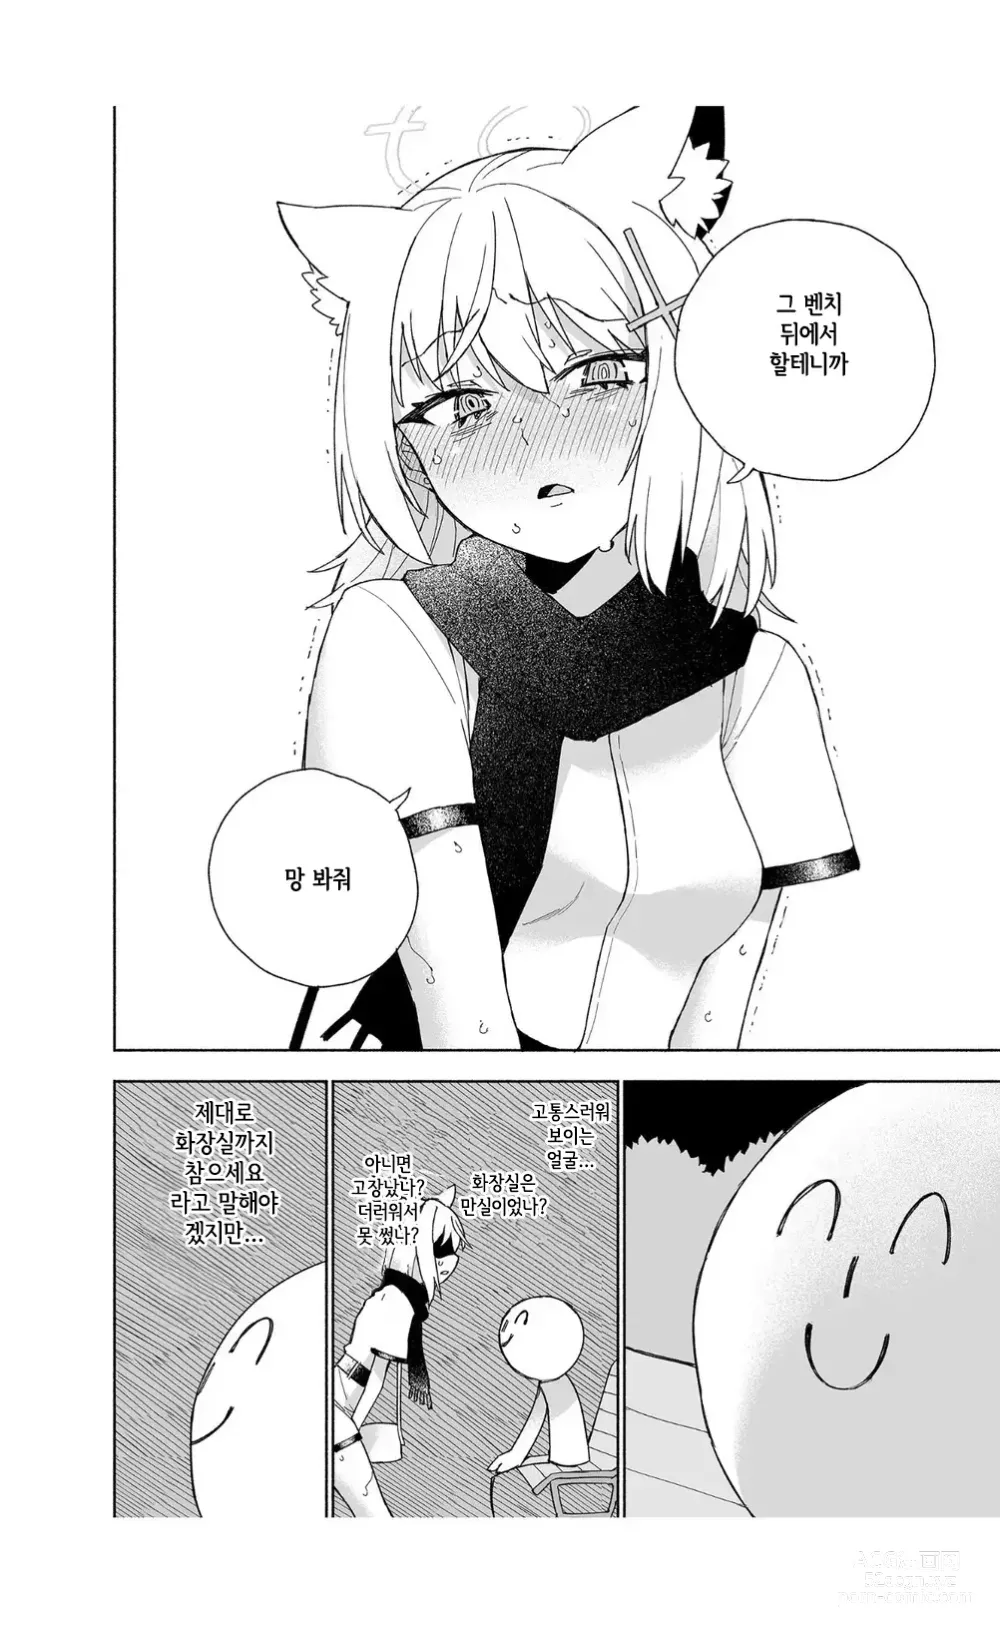 Page 21 of doujinshi 늑대의 물